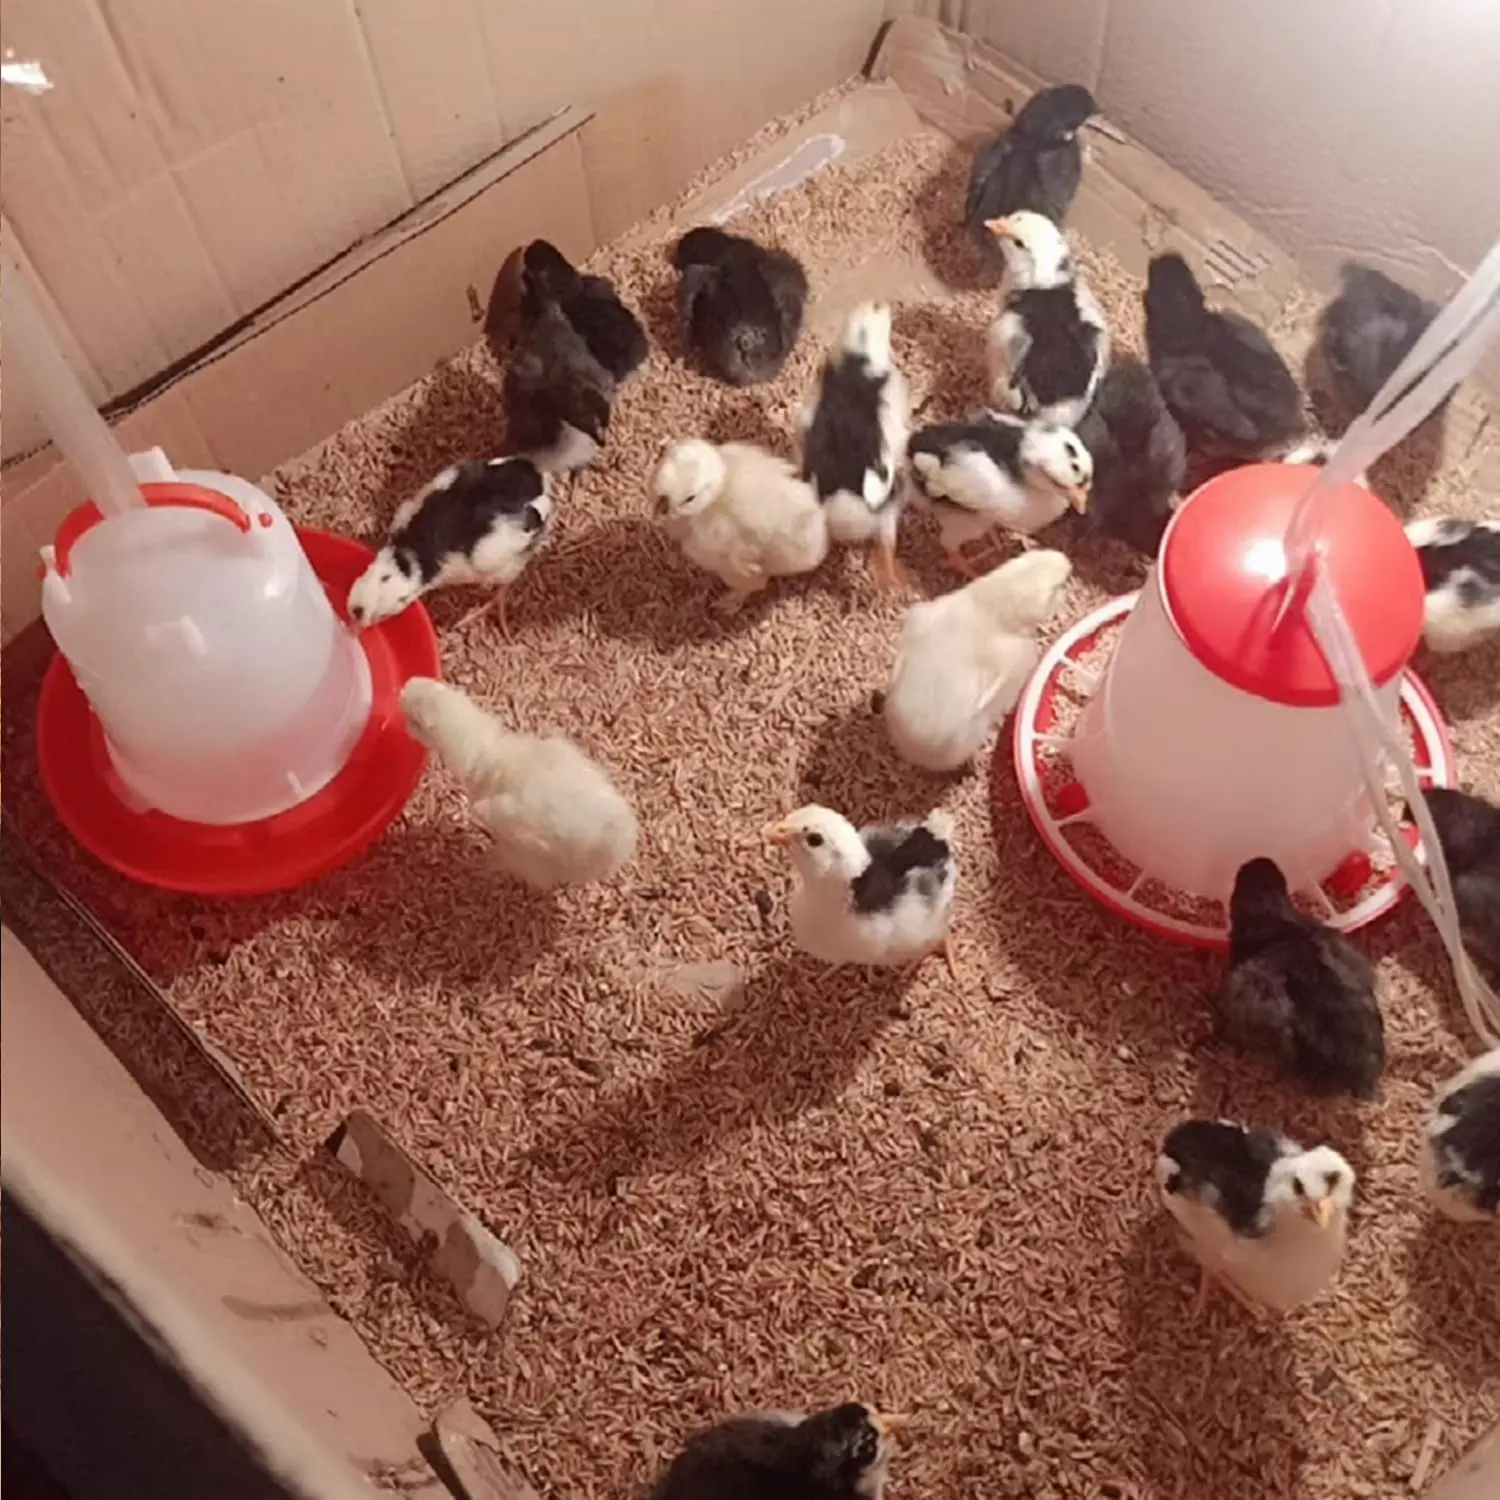 Poultry Farming Equipment Portable and Easy Using Chicken drinkers and feeders